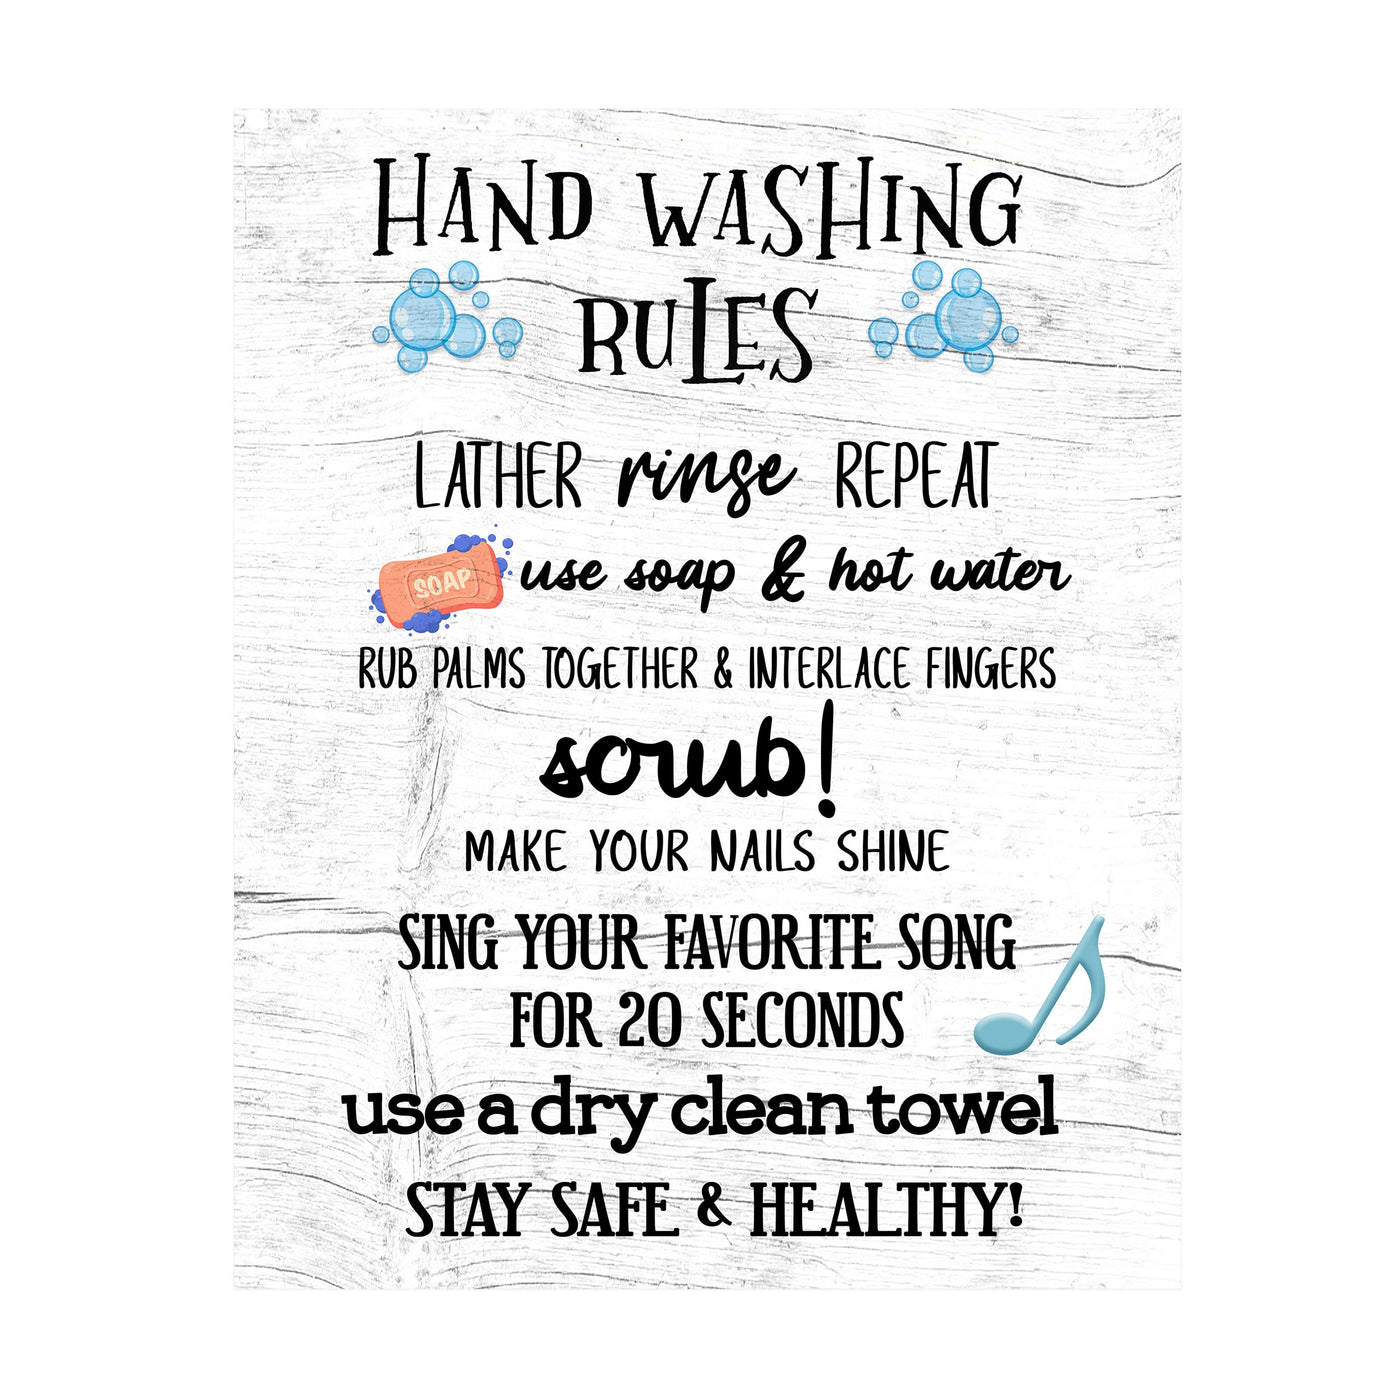 Hand Washing Rules-Lather, Rinse, Repeat- Fun Bathroom Wall Sign- 11x14" Rustic Art Print -Ready to Frame. Funny Home & Bathroom Decor- Housewarming Wall Print. Perfect For Guests & Kids Bathrooms.